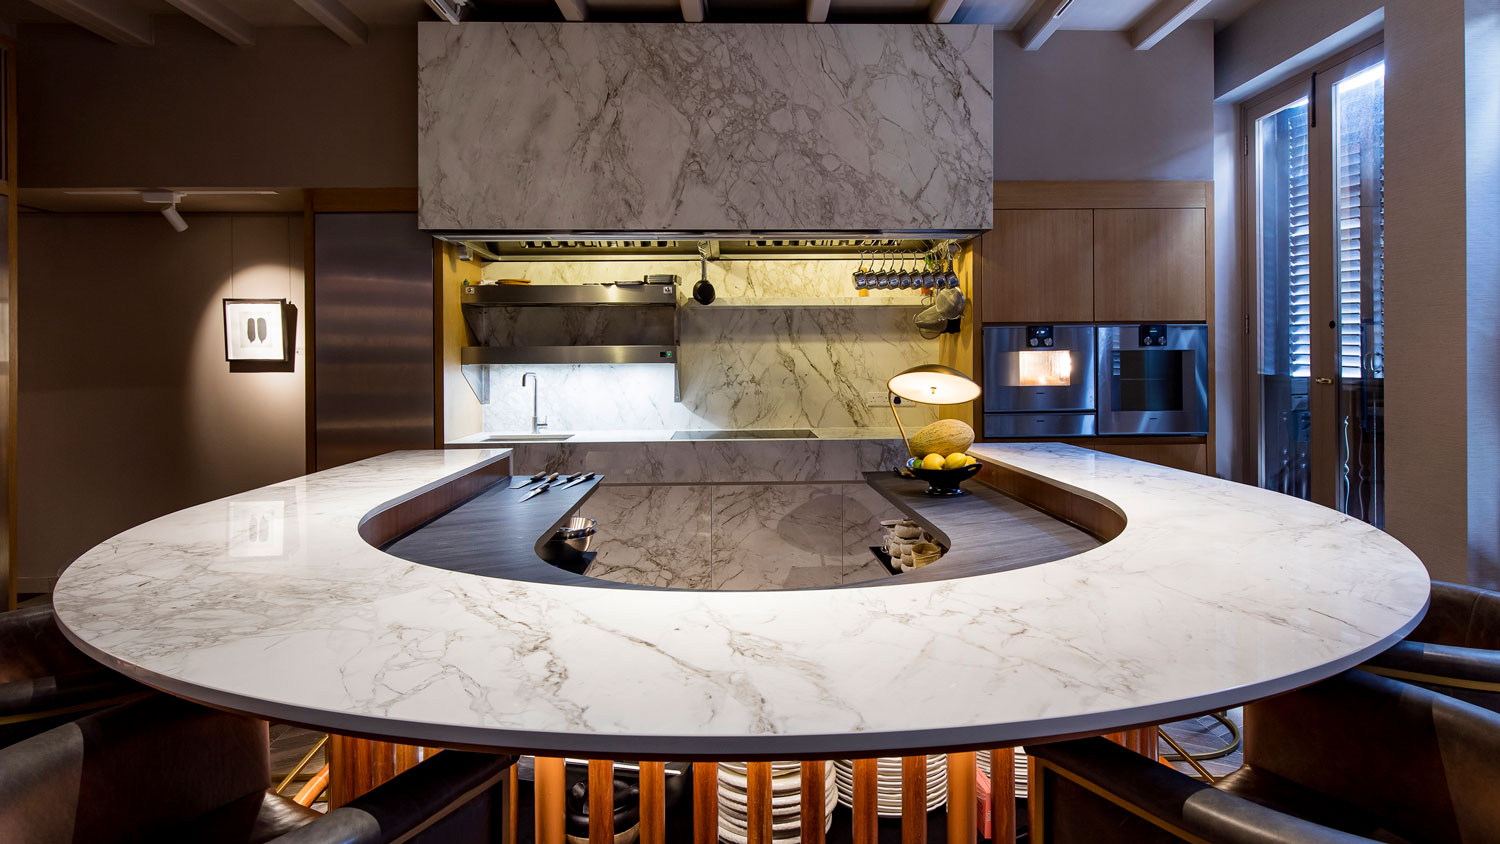 Image of Appetite Dekton 7 in Silestone, selected for the worktop of the Hyatt Regency’s demanding dining room for its extraordinary hygienic capabilities - Cosentino